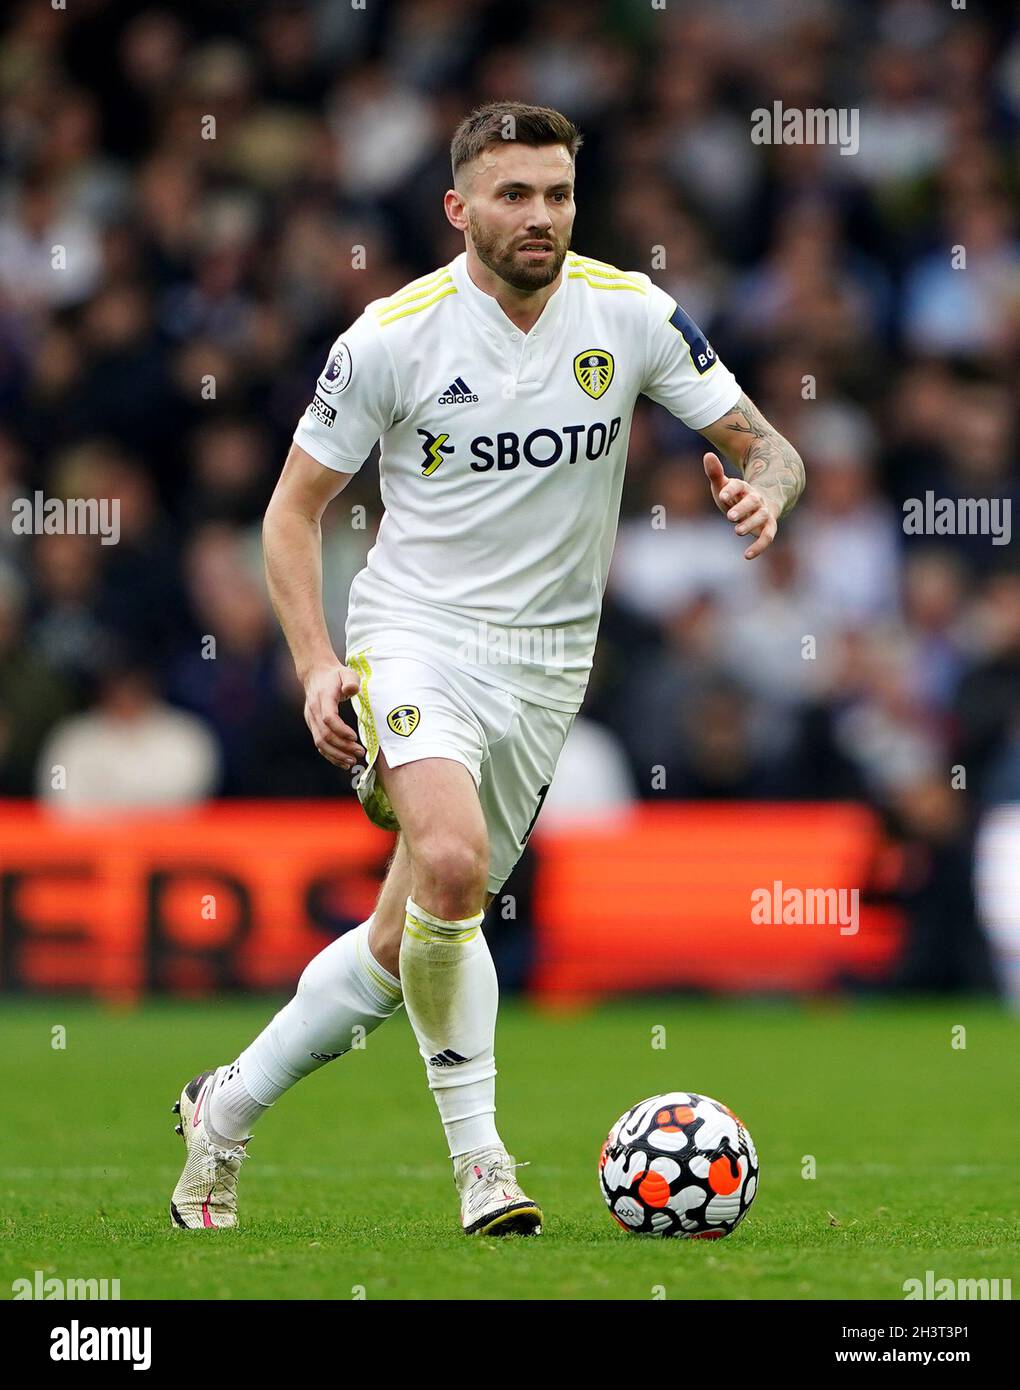 File photo dated 23-10-2021 of Leeds United's Stuart Dallas during the Premier League match at Elland Road, Leeds. Marcelo Bielsa has expressed his admiration for Stuart Dallas following the recent death of the Leeds midfielder's close friend. Issue date: Saturday October 30, 2021. Stock Photo